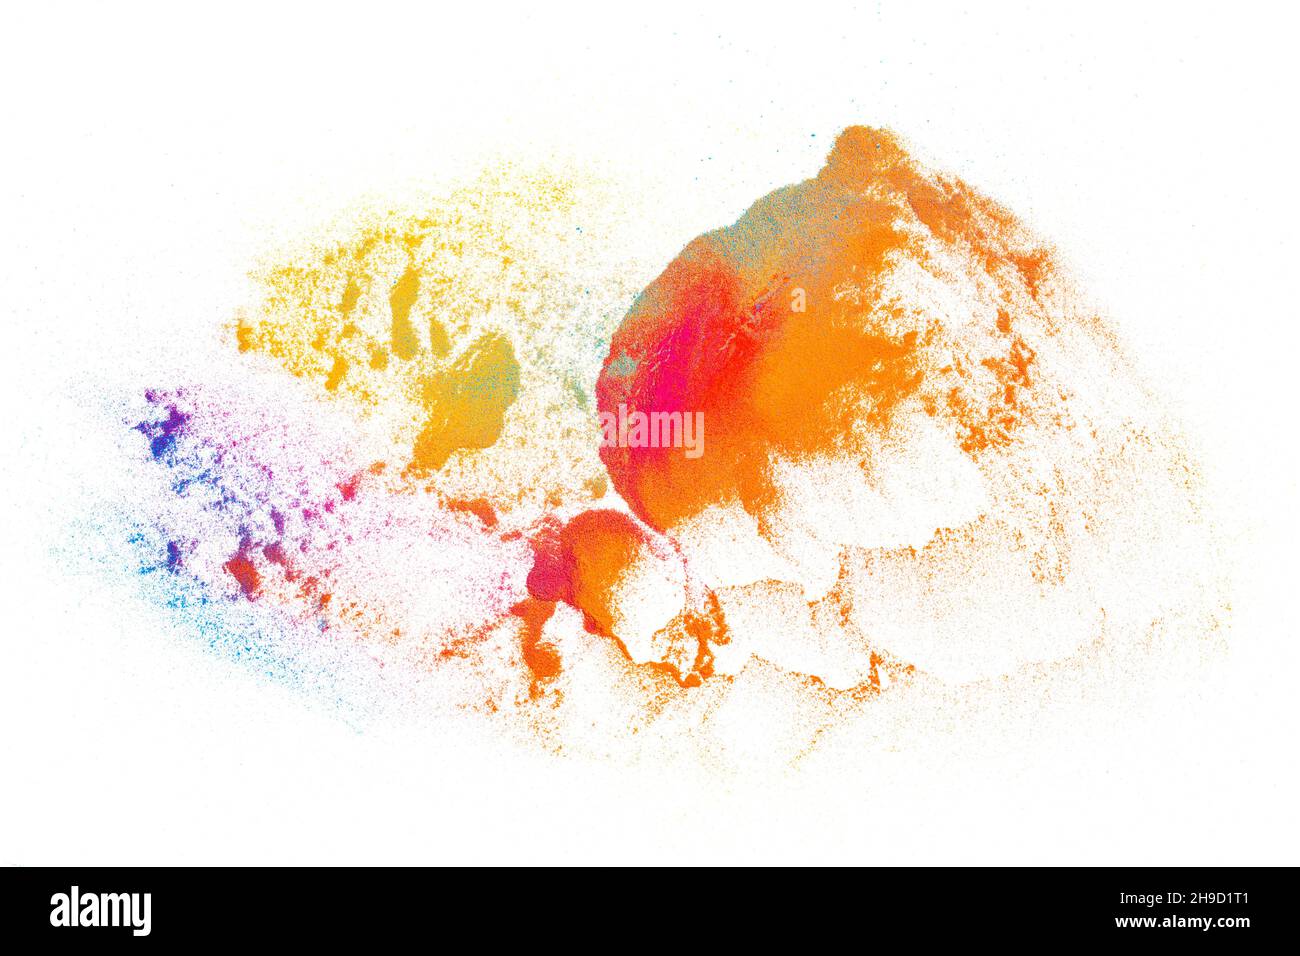 Colorful abstract chemical powder paint mixture and splatter on white background. Isolated multicolored paint explosion and textured dust partices. Cr Stock Photo